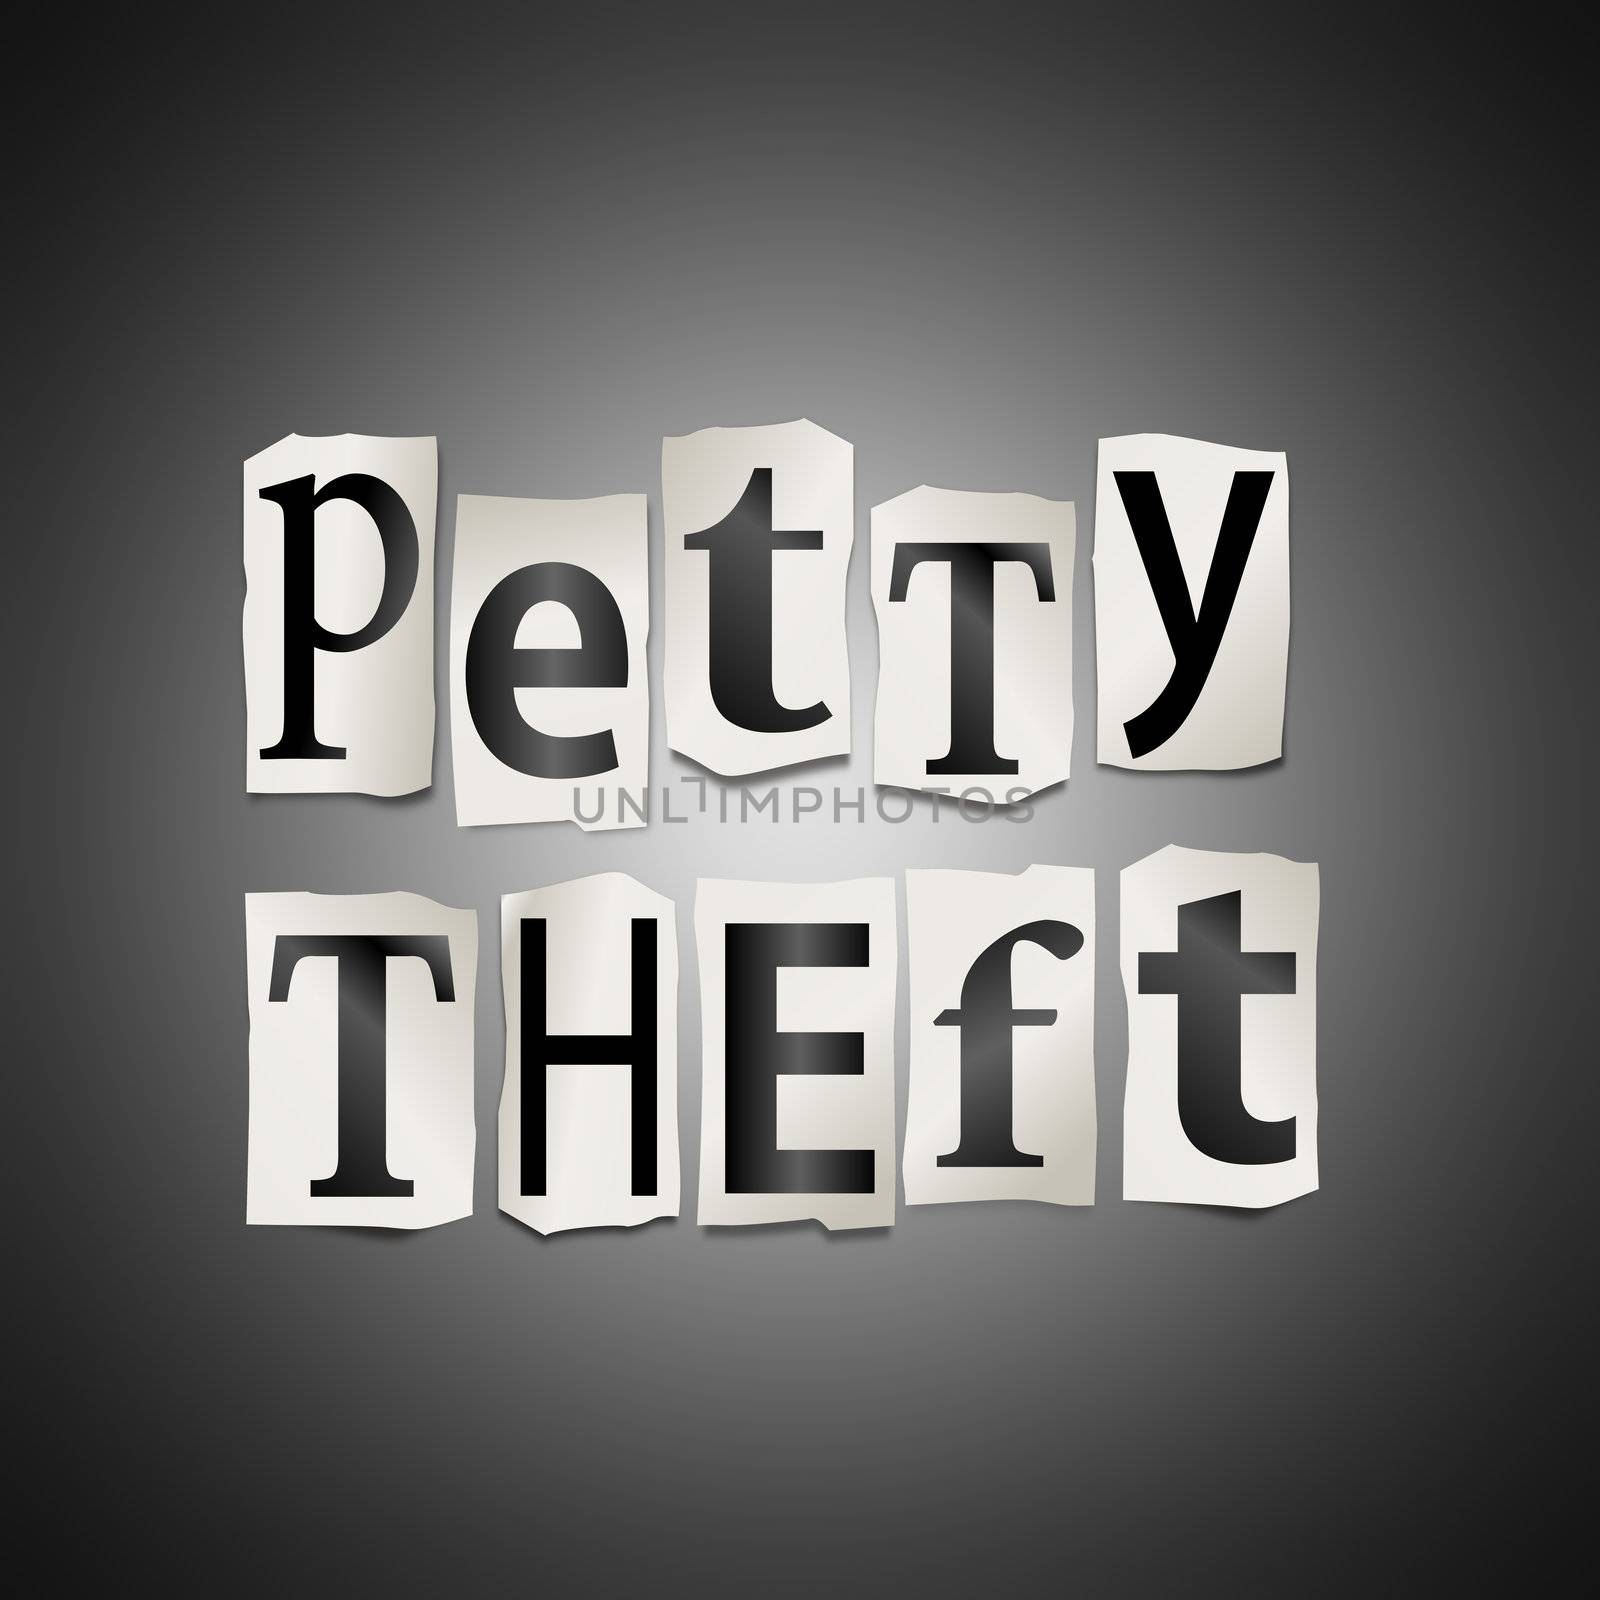 Petty theft concept. by 72soul